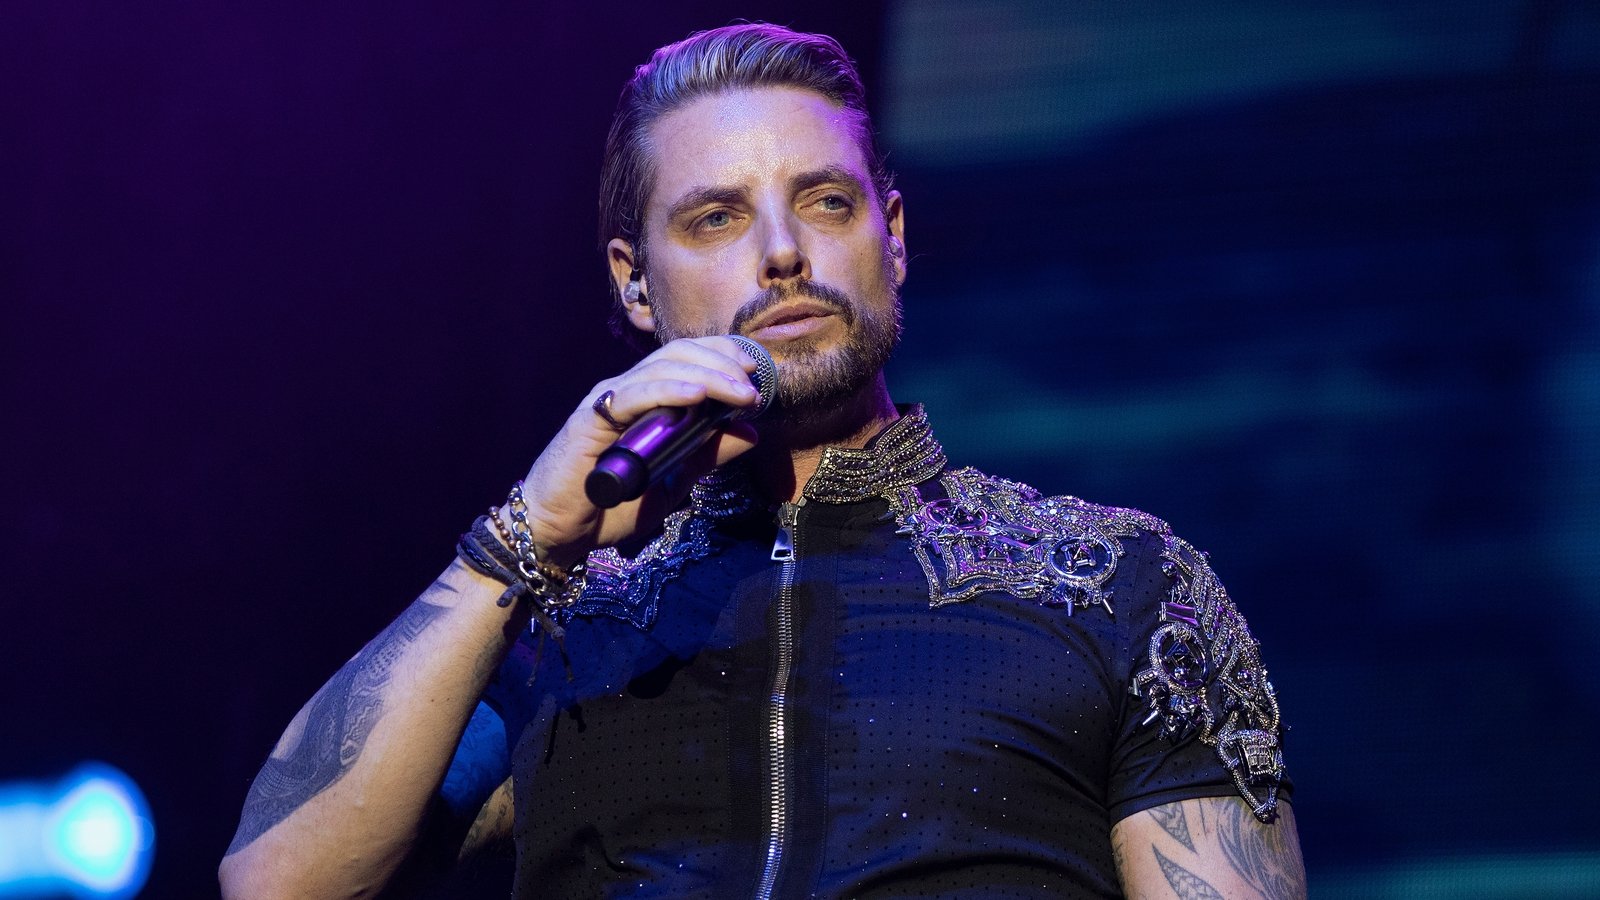 Keith Duffy announces his father has passed